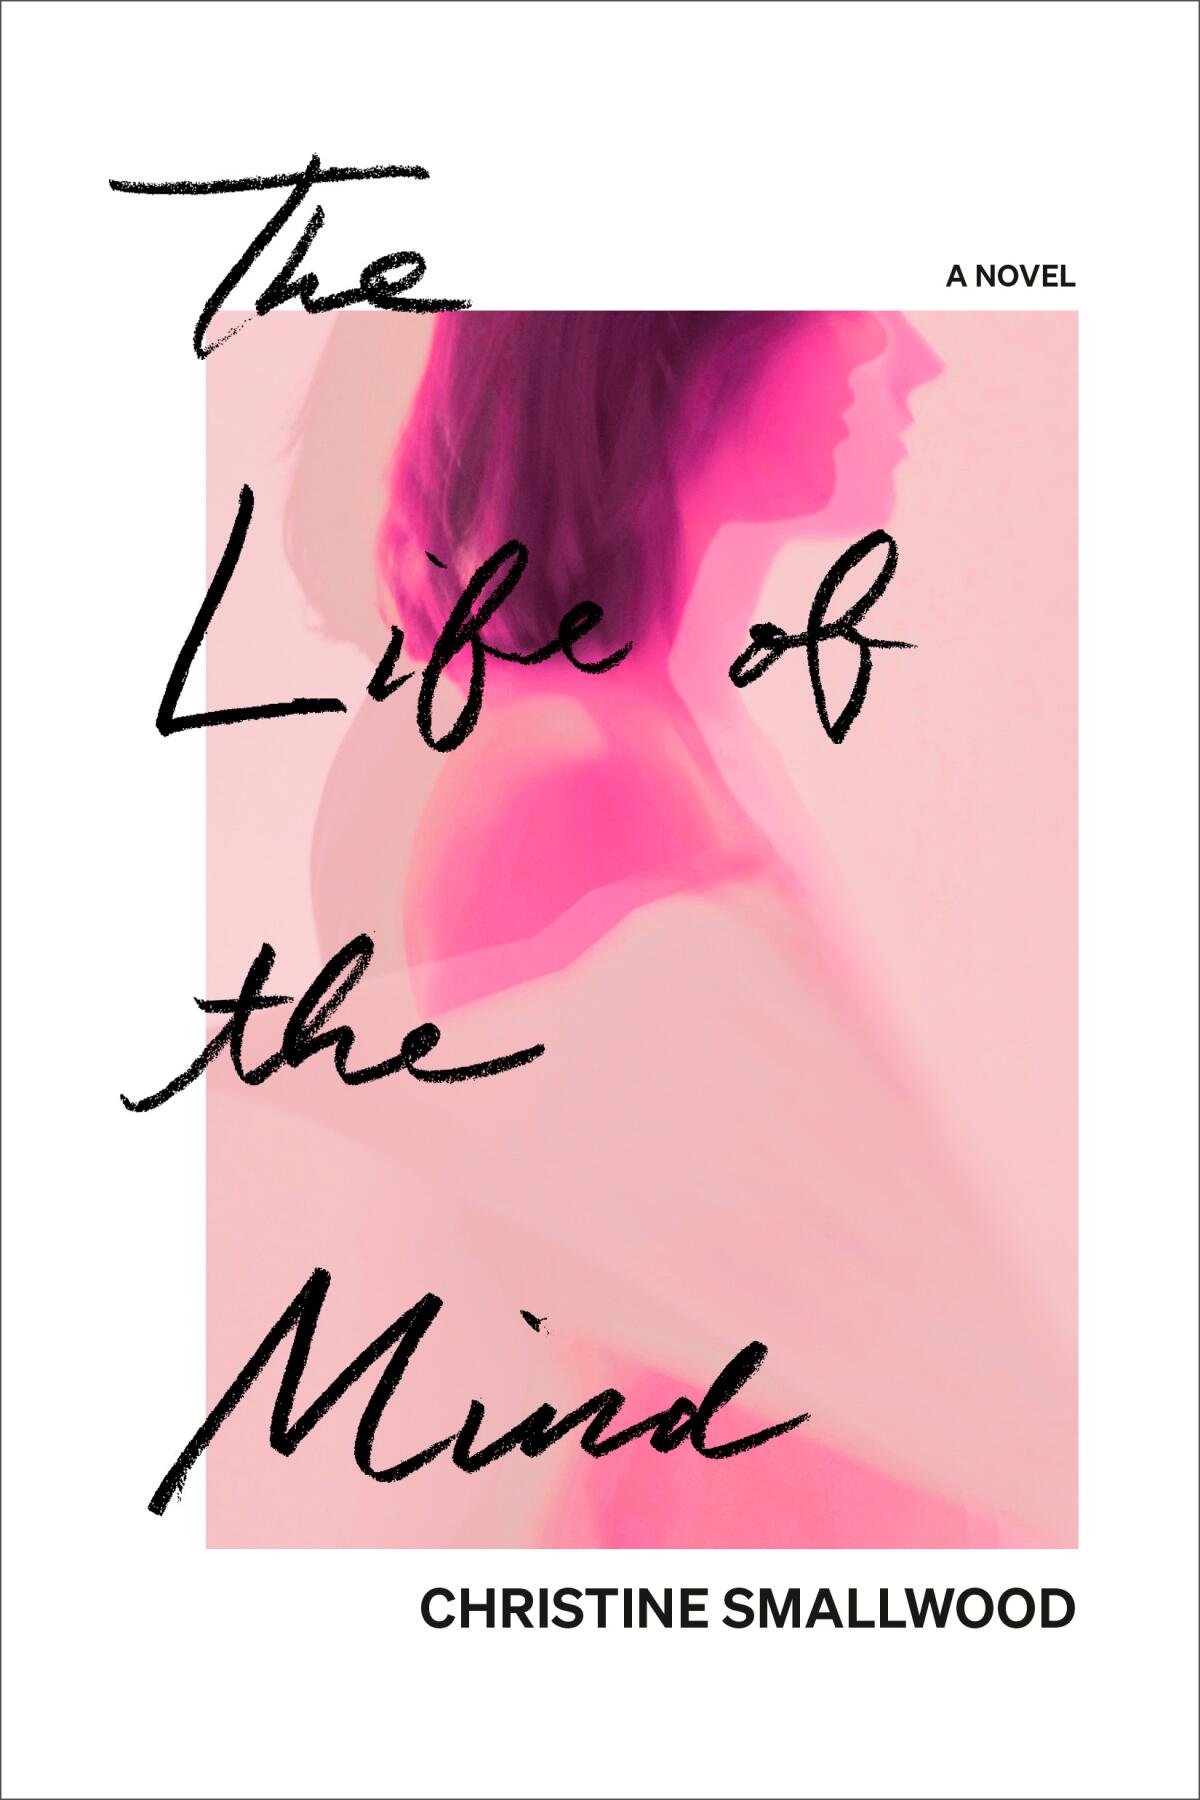 "The Life of the Mind," by Christine Smallwood